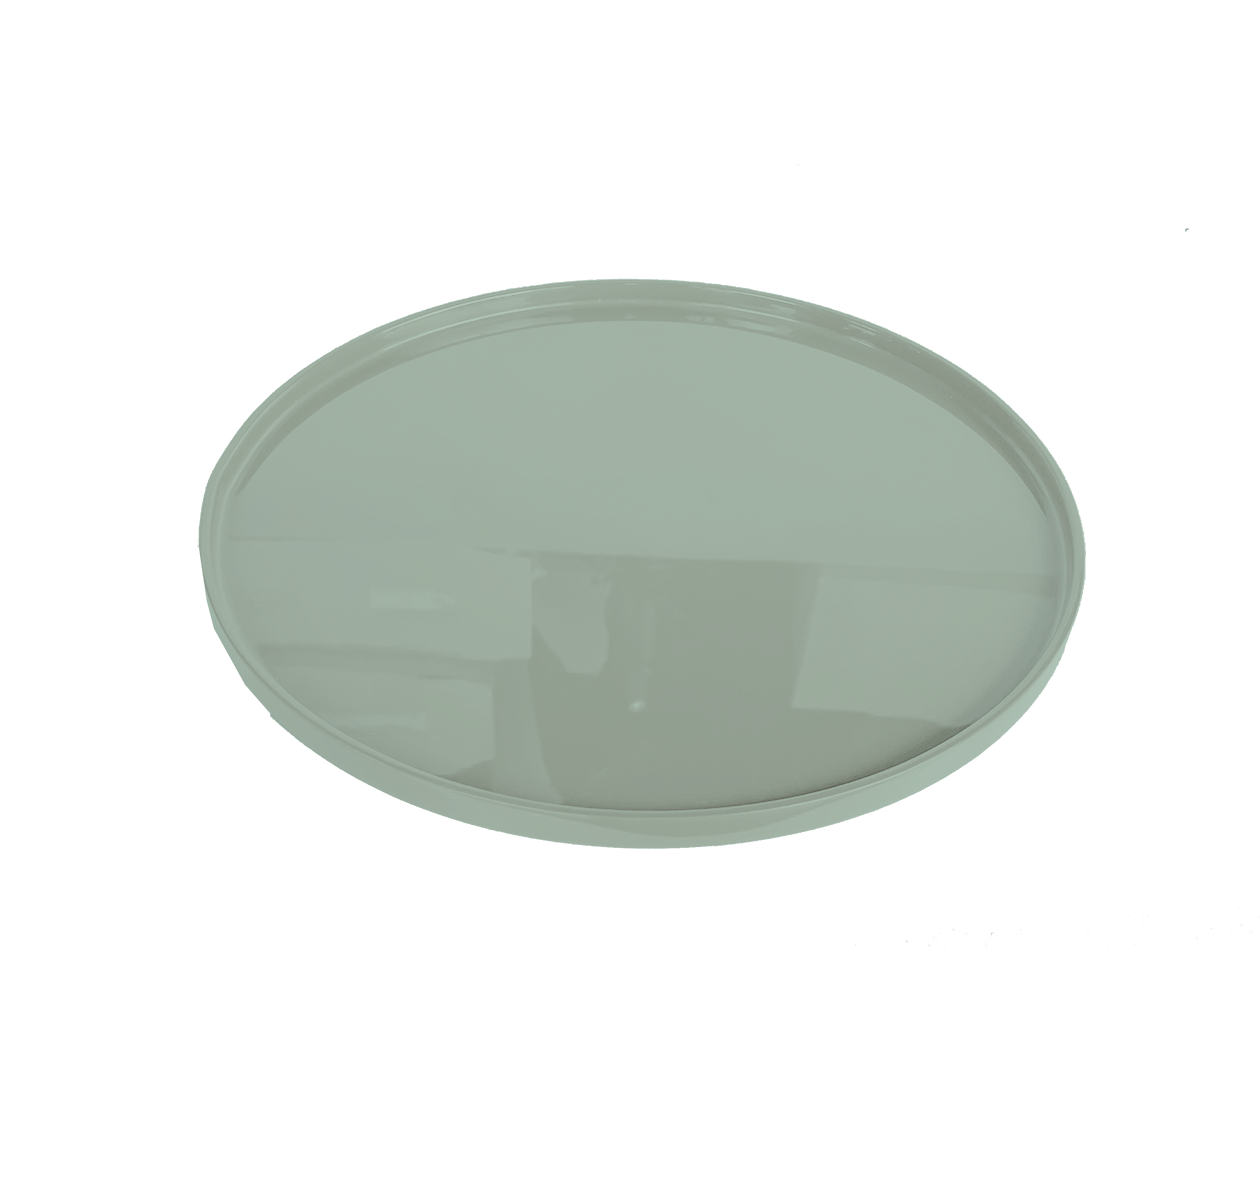  Lacquer Round Tray Light Green 